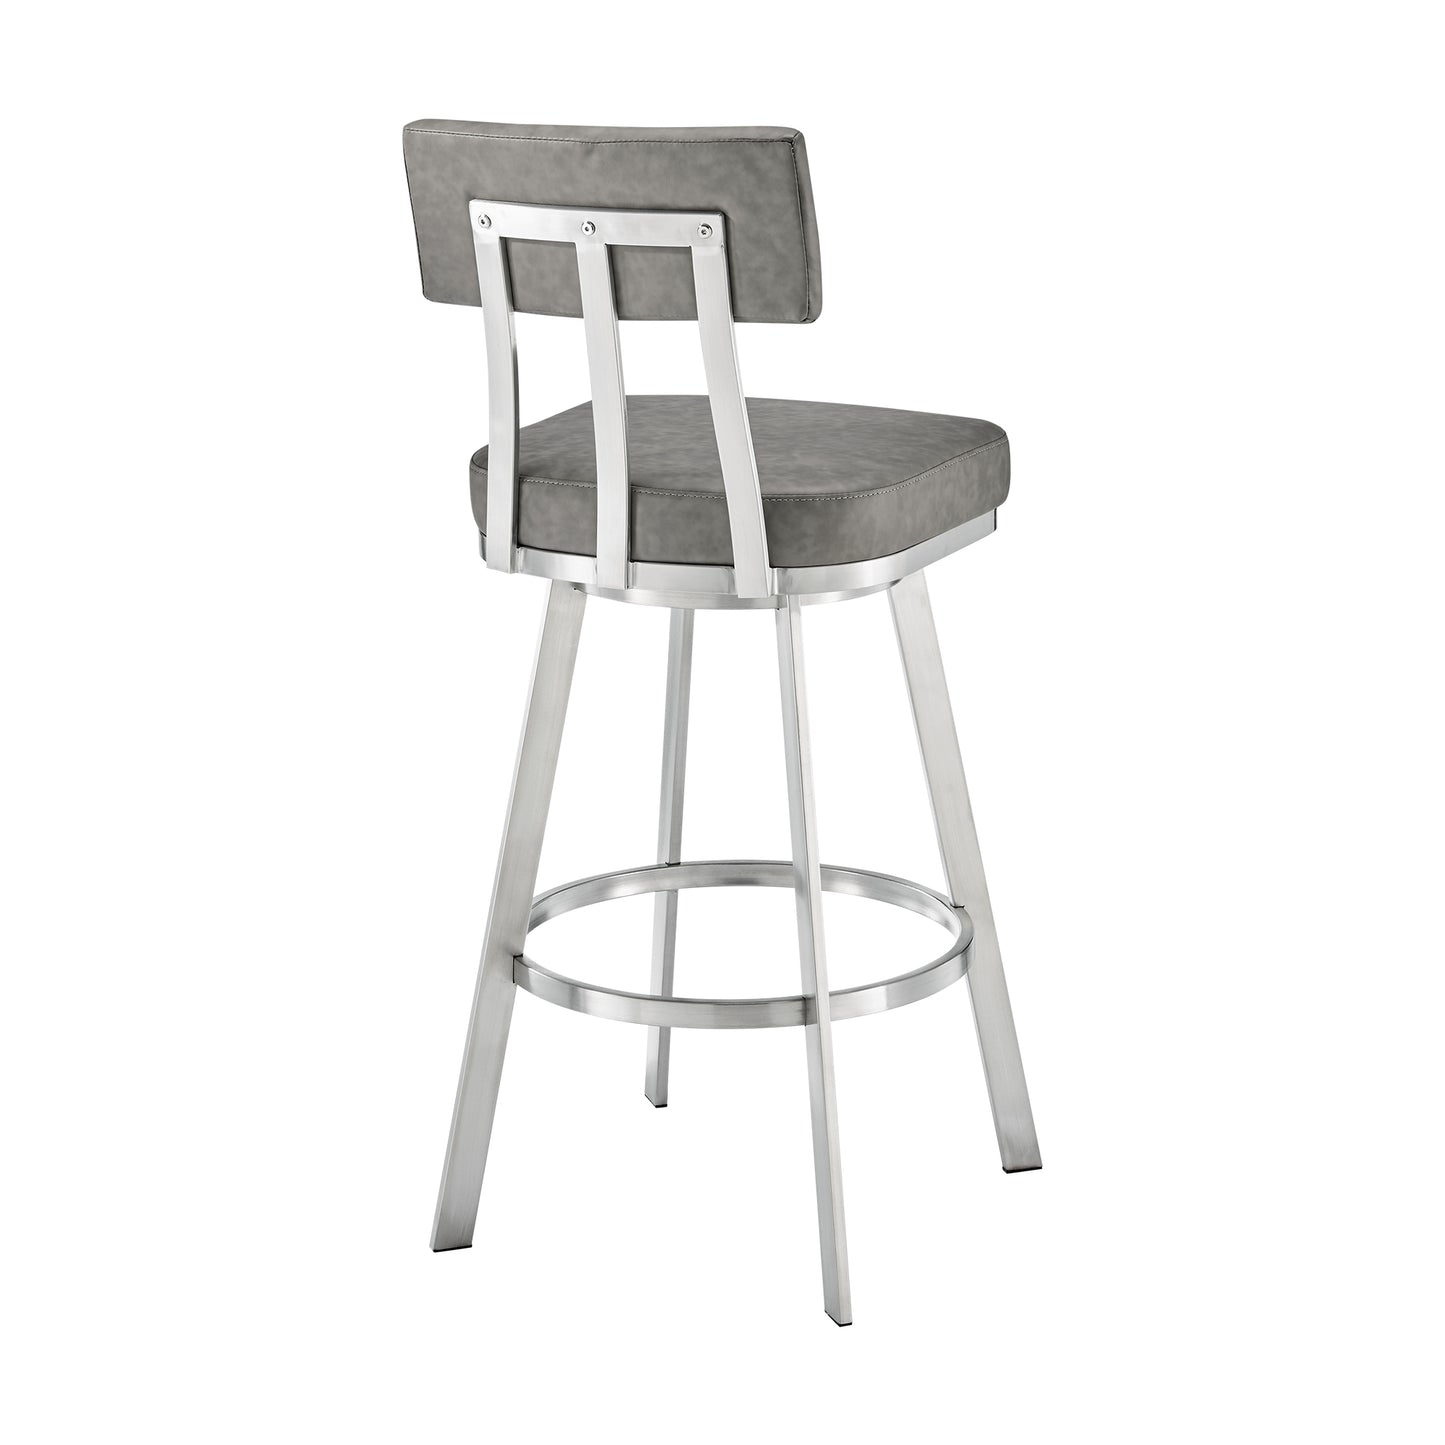 Benjamin 30" Swivel Bar Stool in Brushed Stainless Steel with Gray Faux Leather